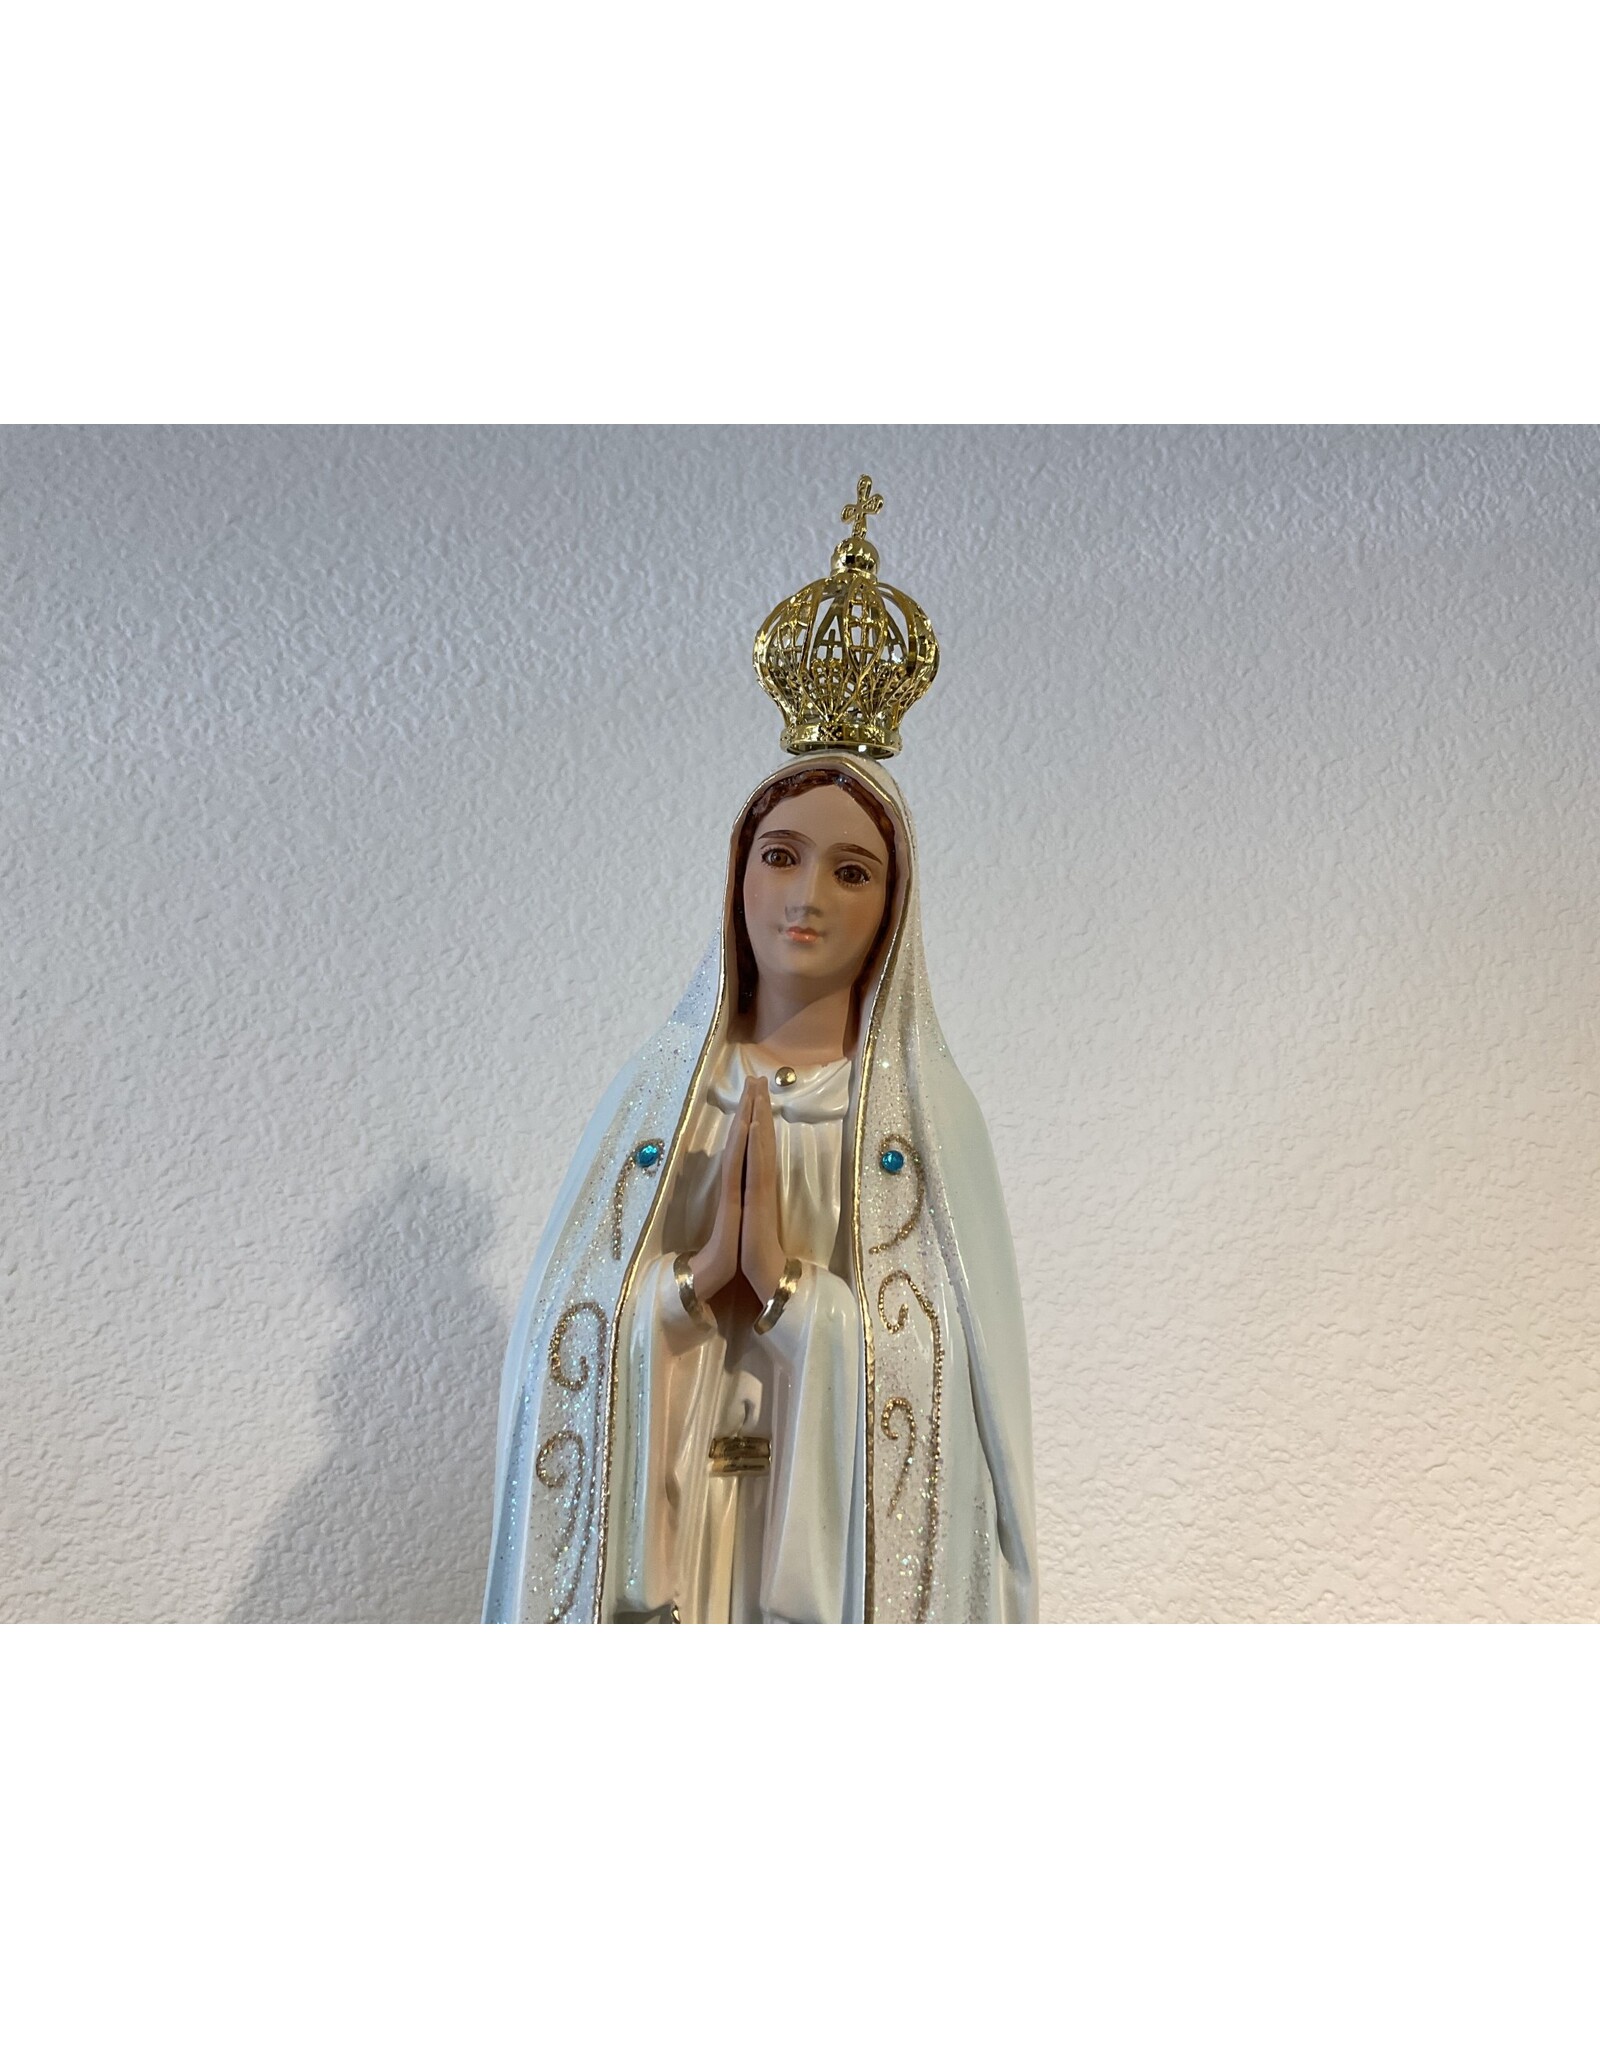 San Francis Statue - Our Lady of Fatima, Detachable Crown (20")